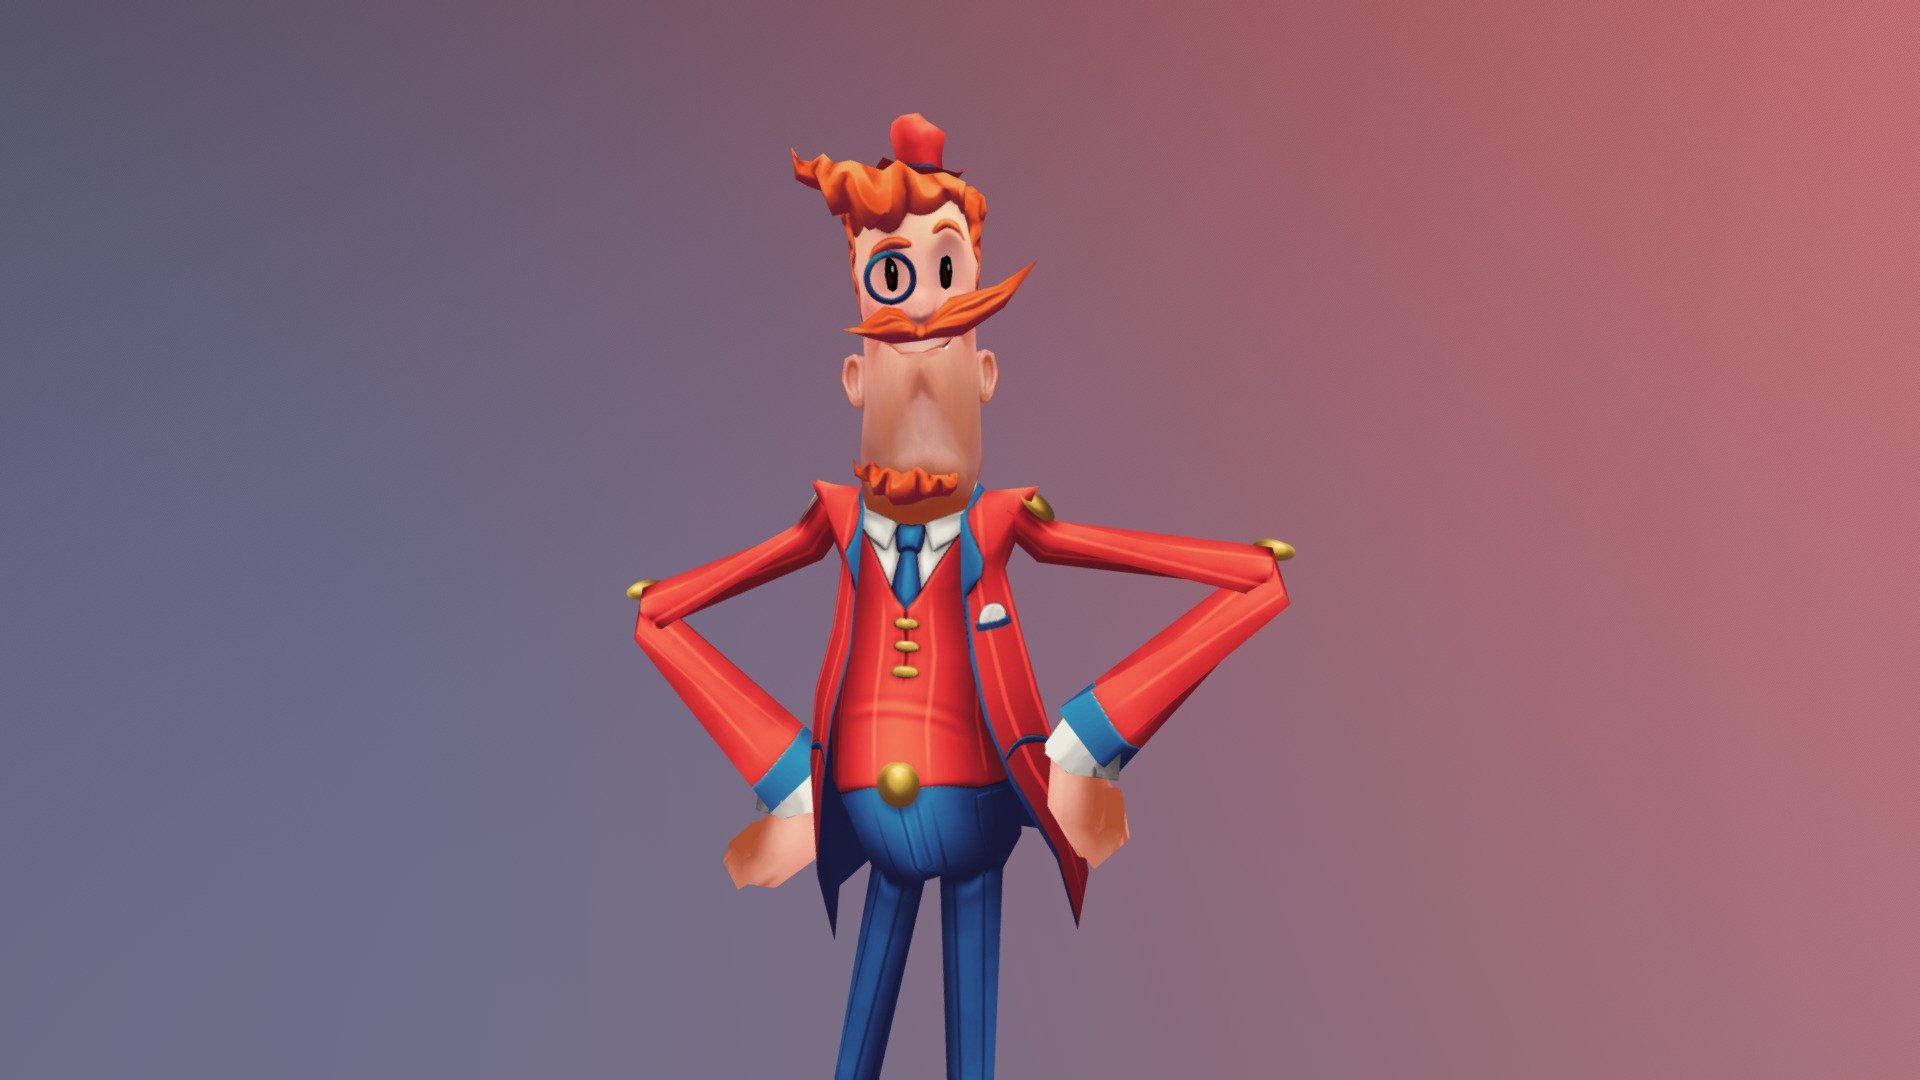 This is a personal project that I made for fun, trying to translate a character with a  very simple and flat look,  into a good looking 3D model that could match the original simple  style.

It was a really quick project (5days with rigging and animation included), but I had a lot of fun making this guy! 
I hope you like it! 

Mr. Toffee is a original character from Candy Crush Saga, from King Games 3d model